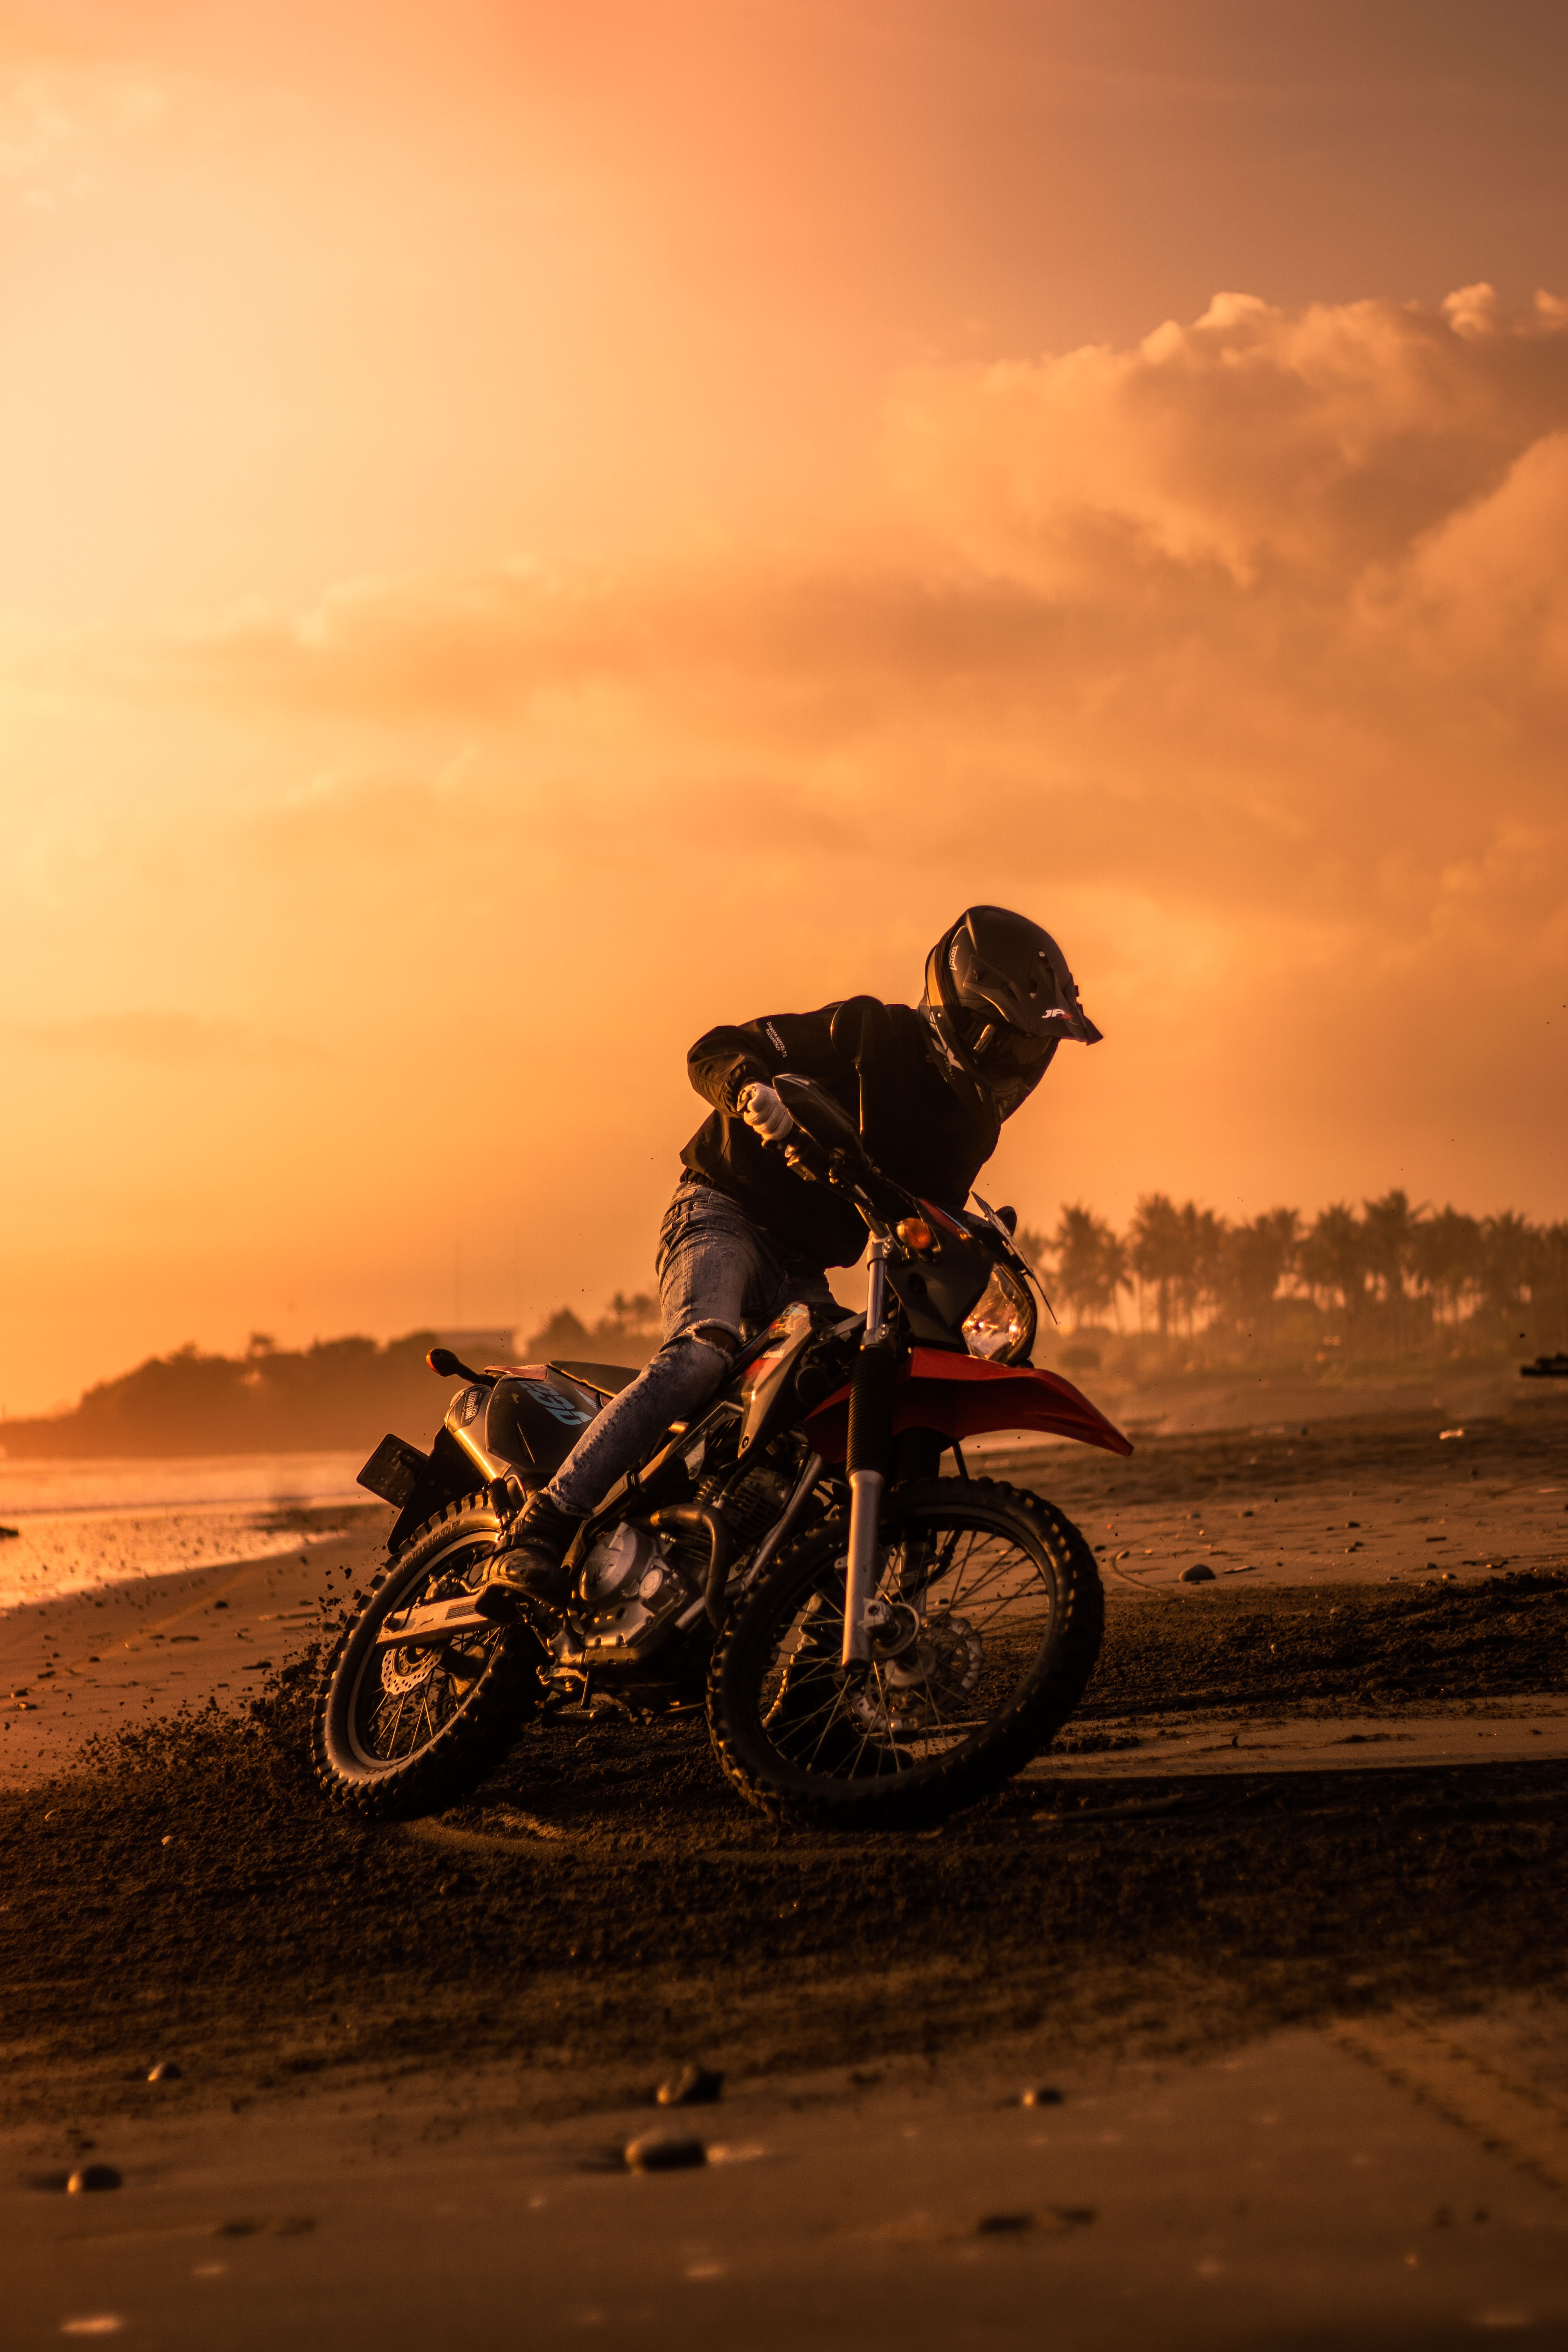 bike, motorcycles, beach, motorcyclist, motorcycle, cross for android